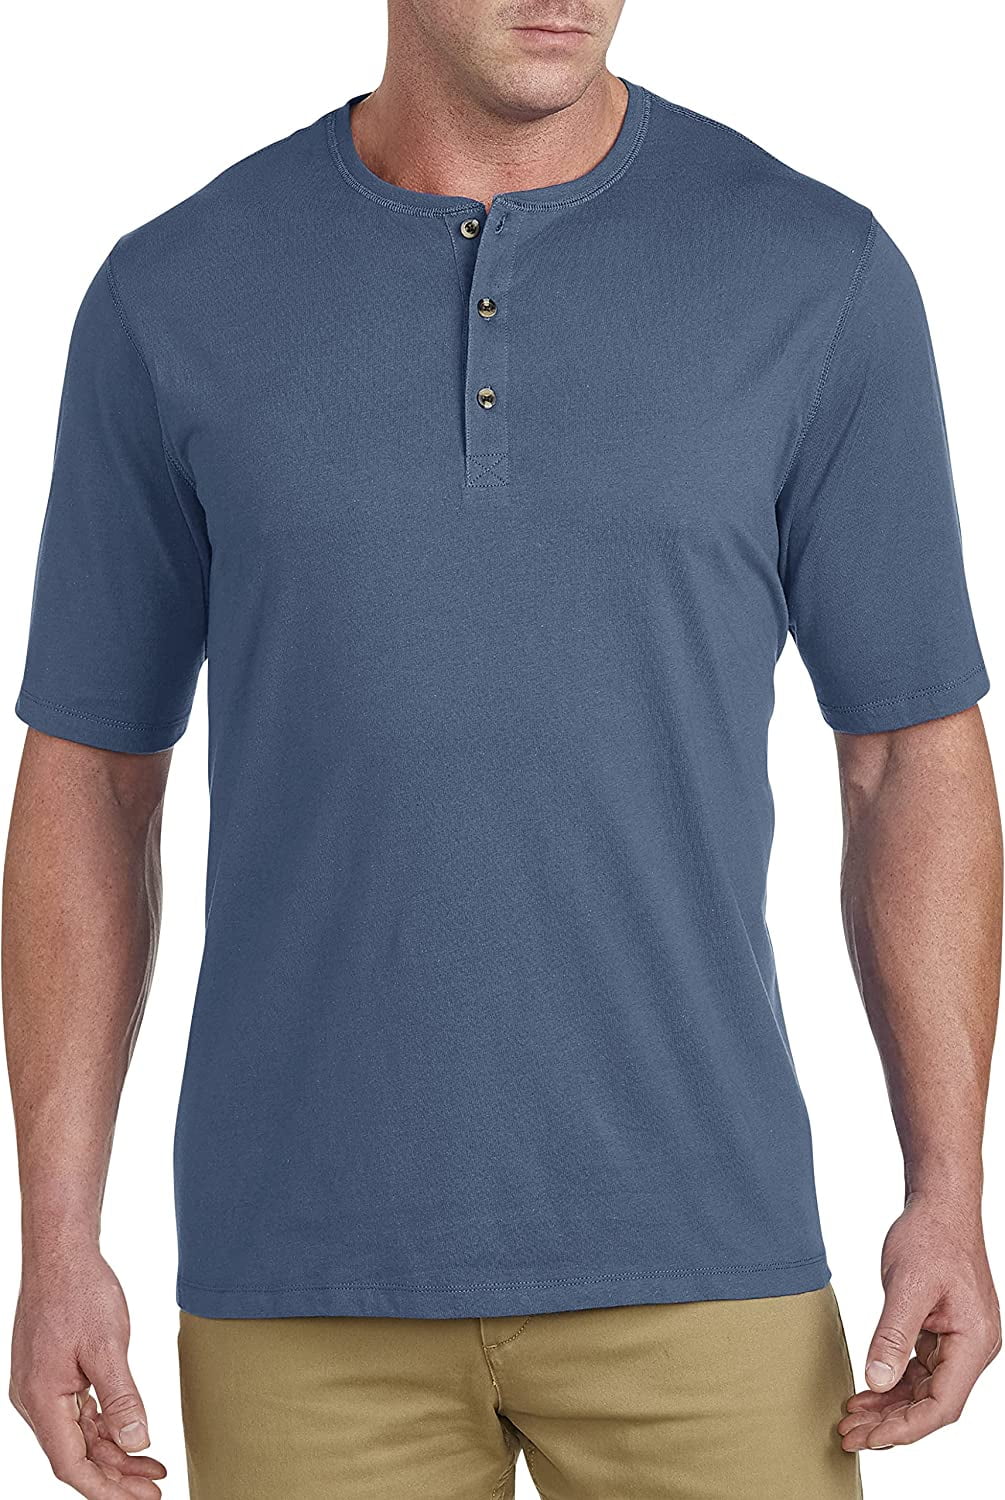 Harbor Bay by DXL Big and Tall Moisture-Wicking Polo Shirt Flagship ...